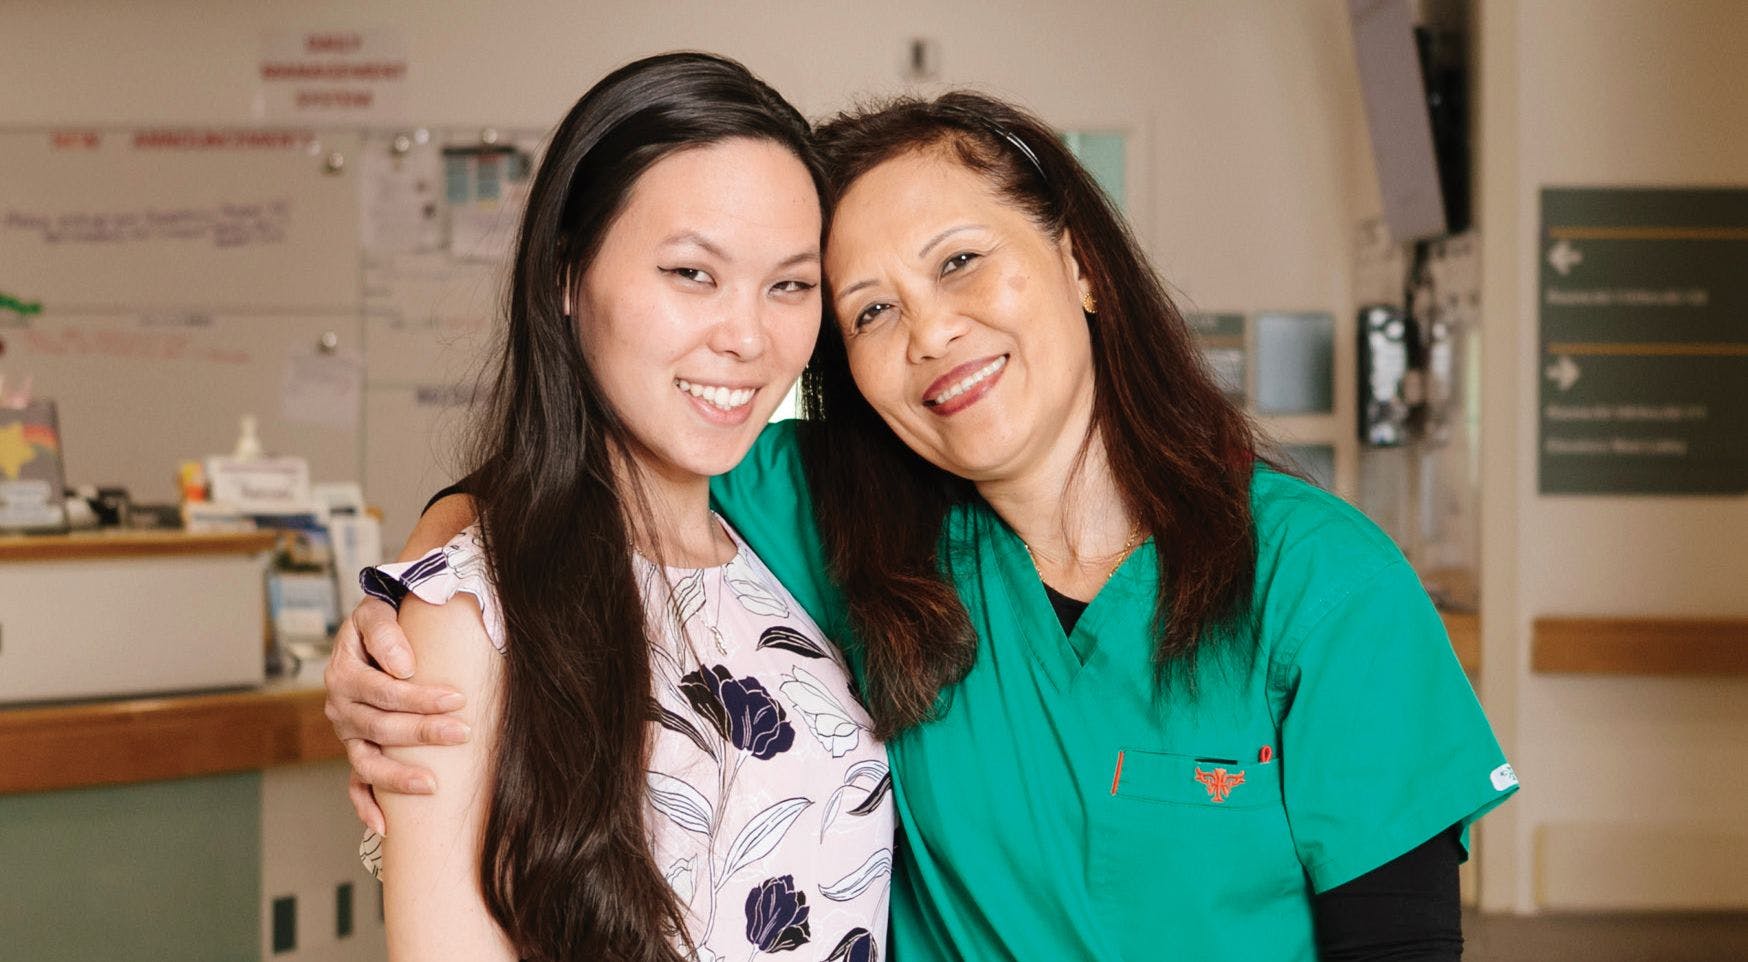 From left: Jenni Chang, B.S.N., RN, OCN, and Andrea Valera, RN
 - PHOTOS BY KARA BRODGESELL